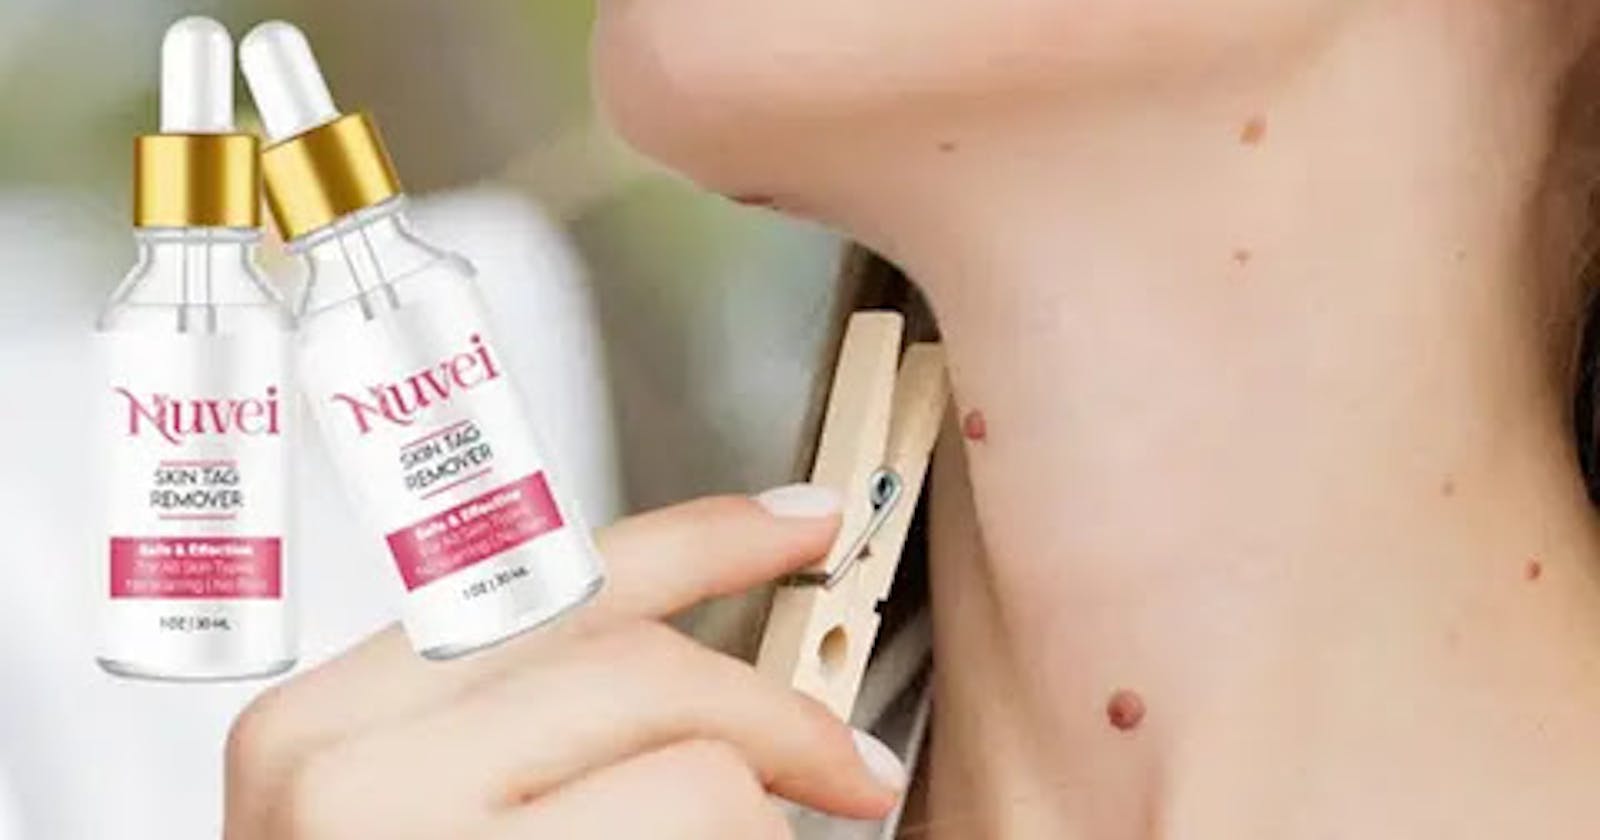 Nuvei Skin Tag Remover - Don't Buy Before Read Official Reviews!